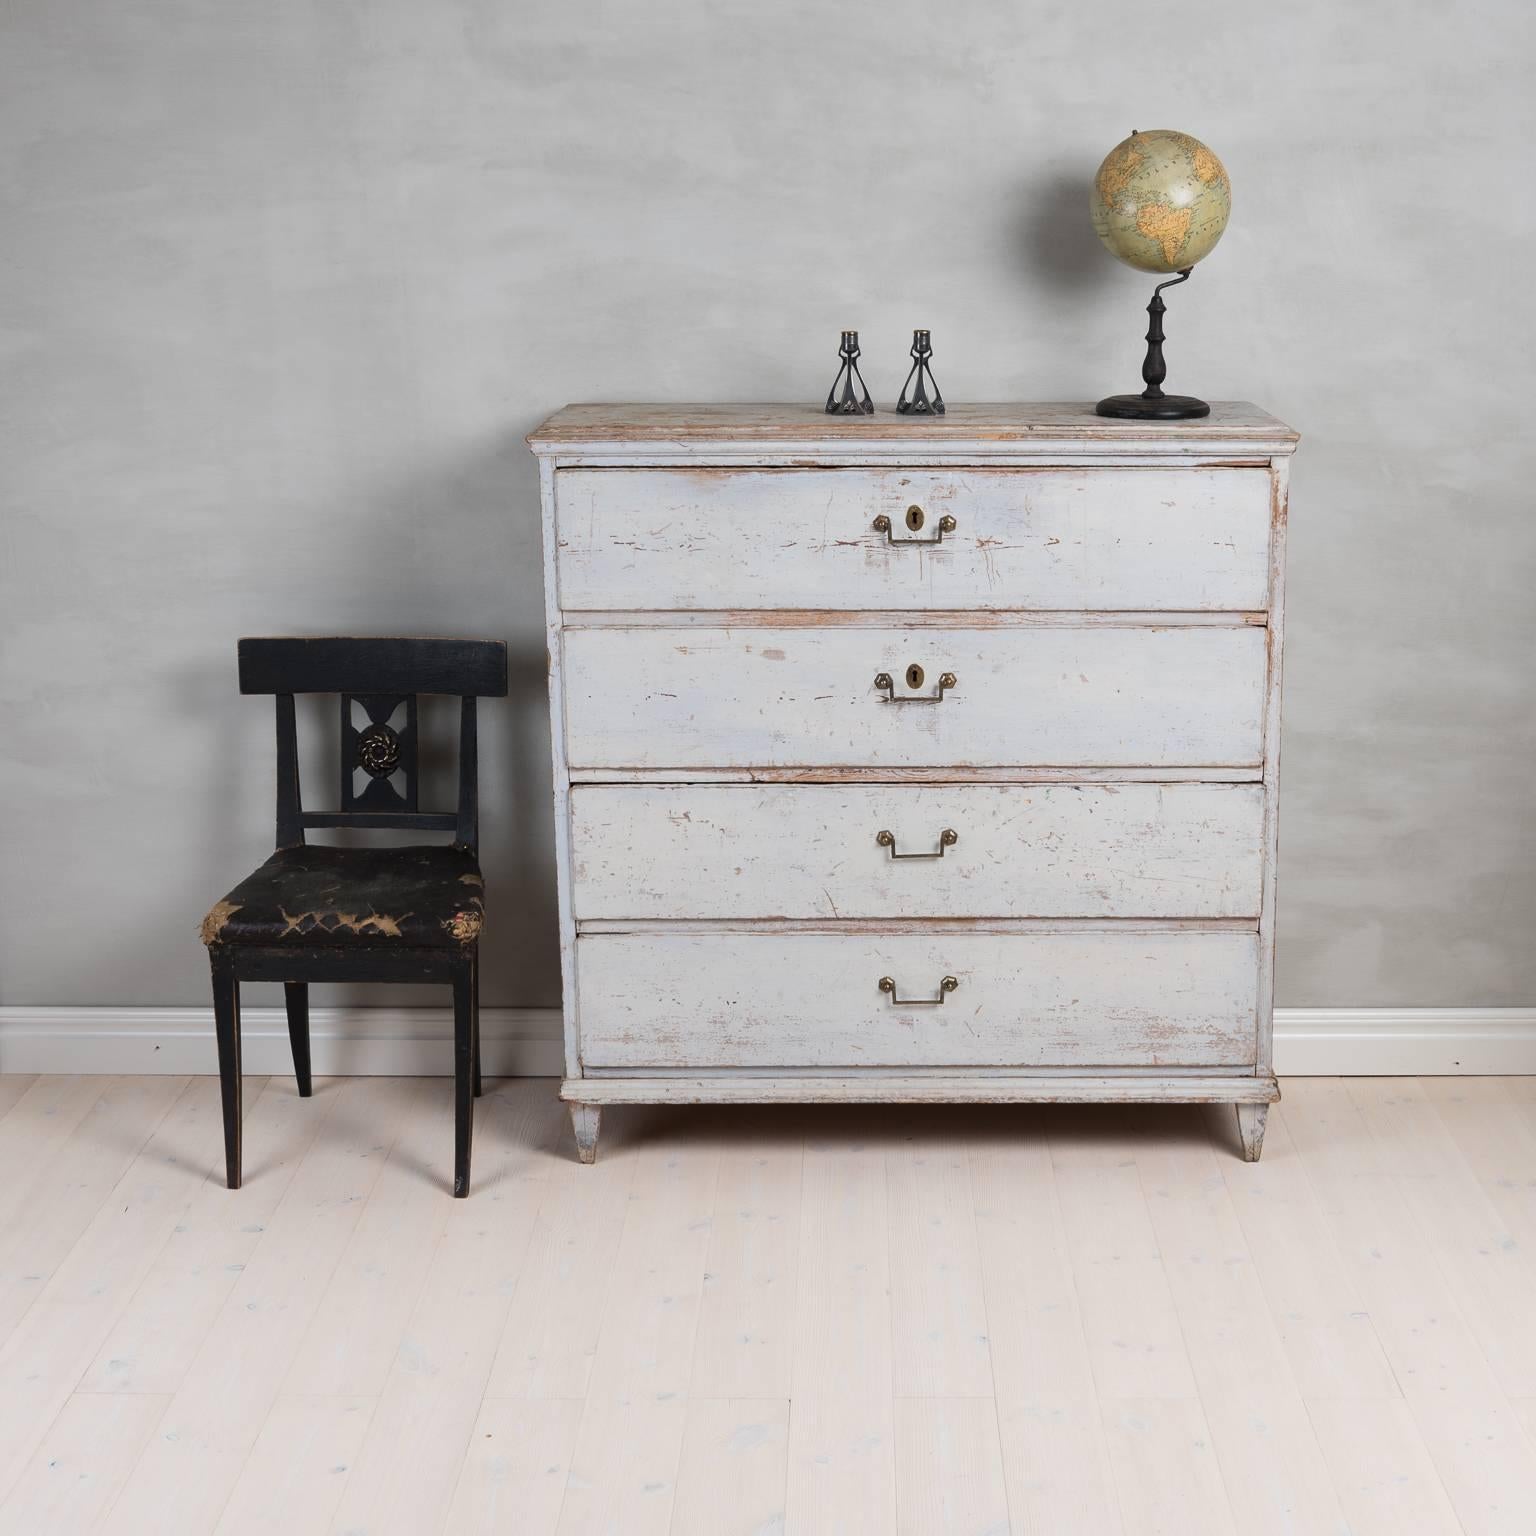 Painted Swedish Provincial Gustavian Bureau from the Early 1800s with Original Paint